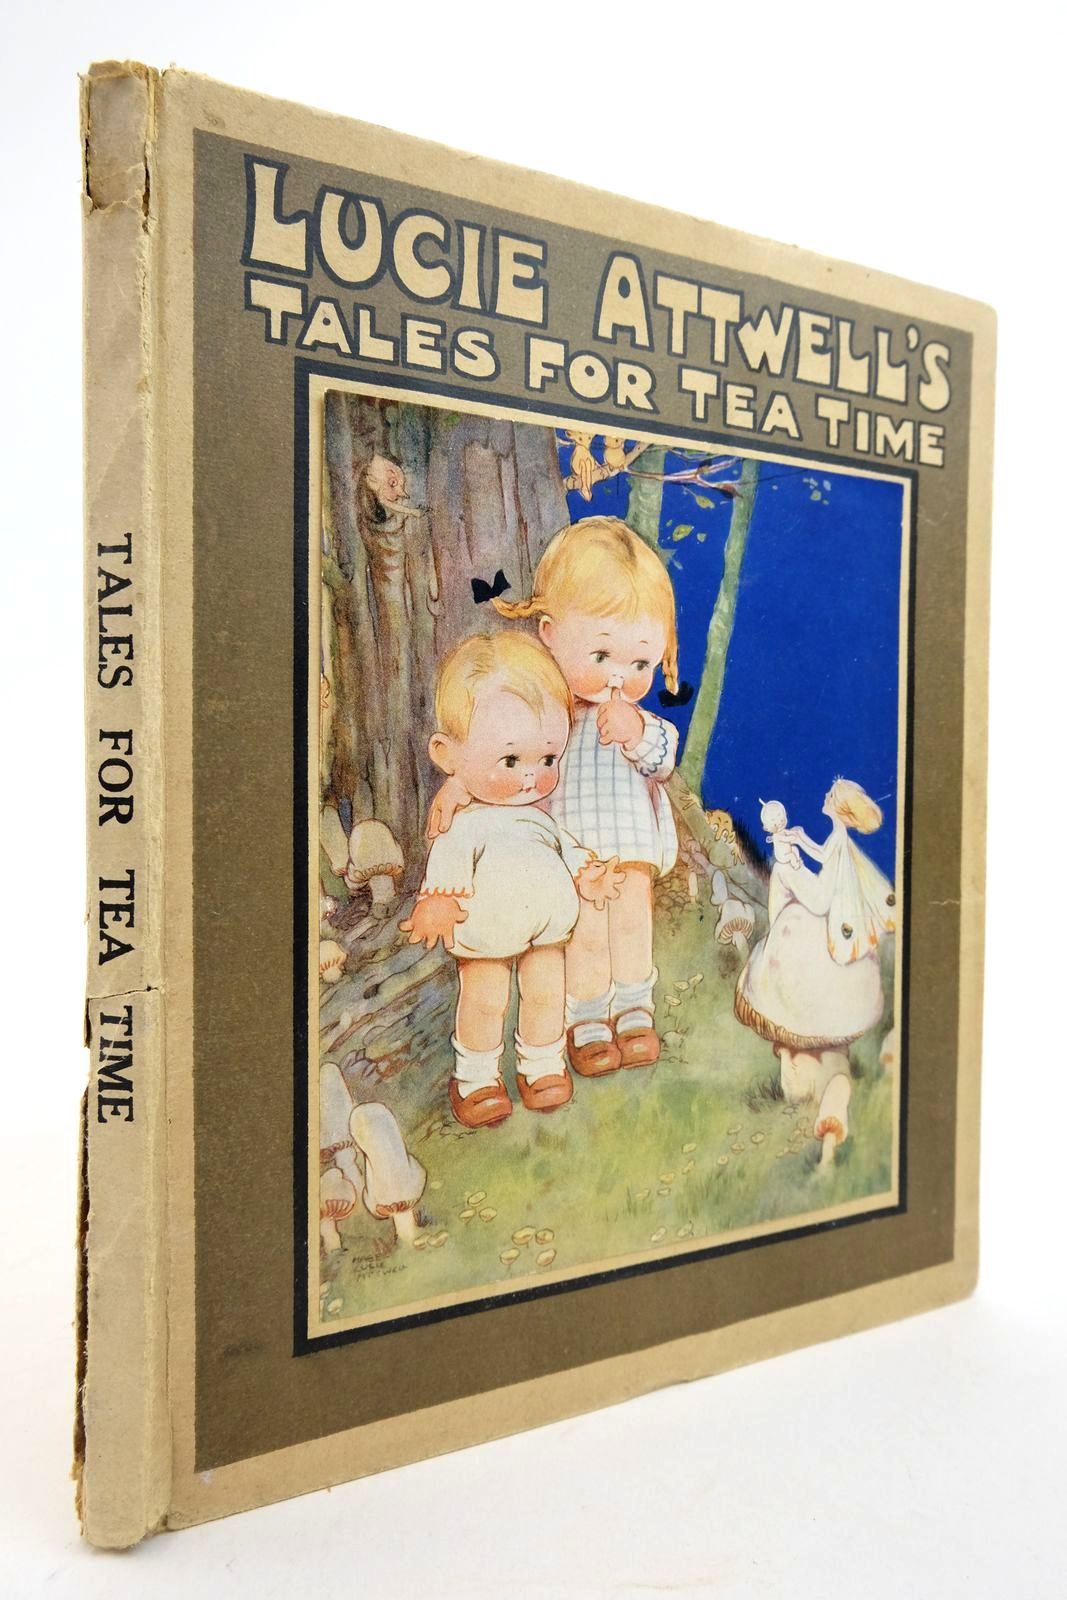 Photo of LUCIE ATTWELL'S TALES FOR TEA TIME illustrated by Attwell, Mabel Lucie published by S.W. Partridge & Co. (STOCK CODE: 2140866)  for sale by Stella & Rose's Books